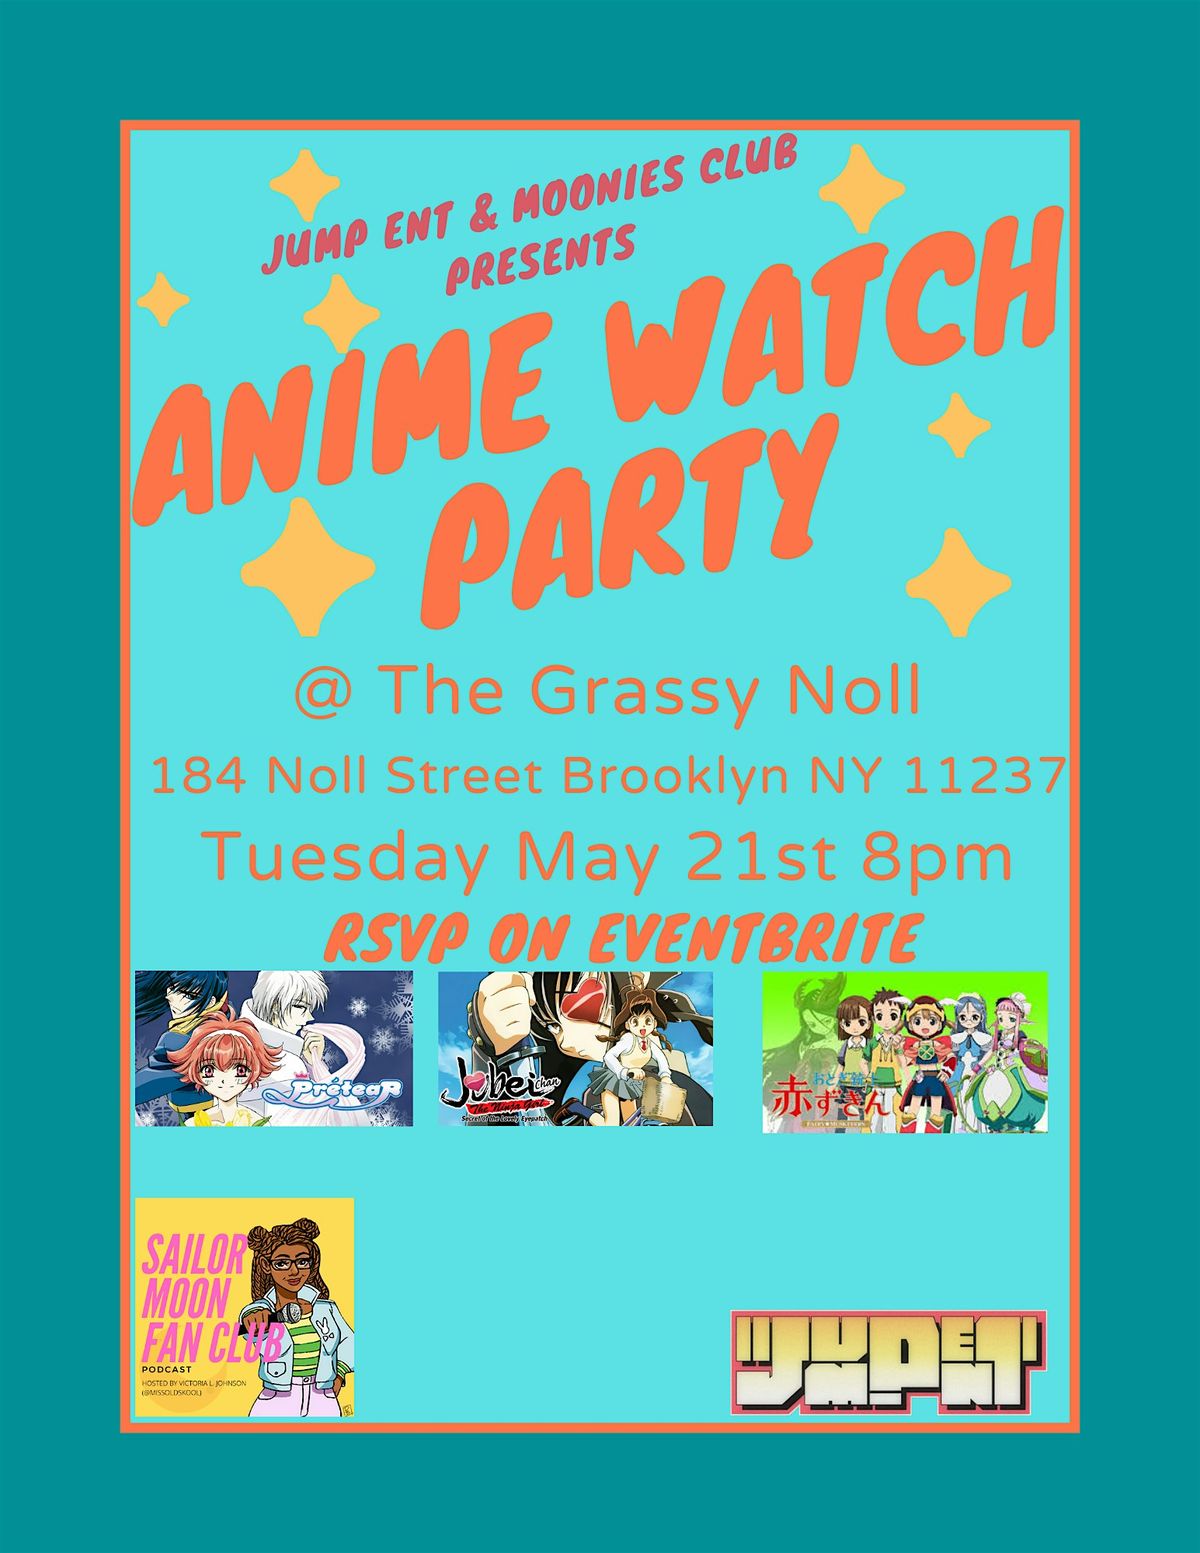 Anime Watch Party